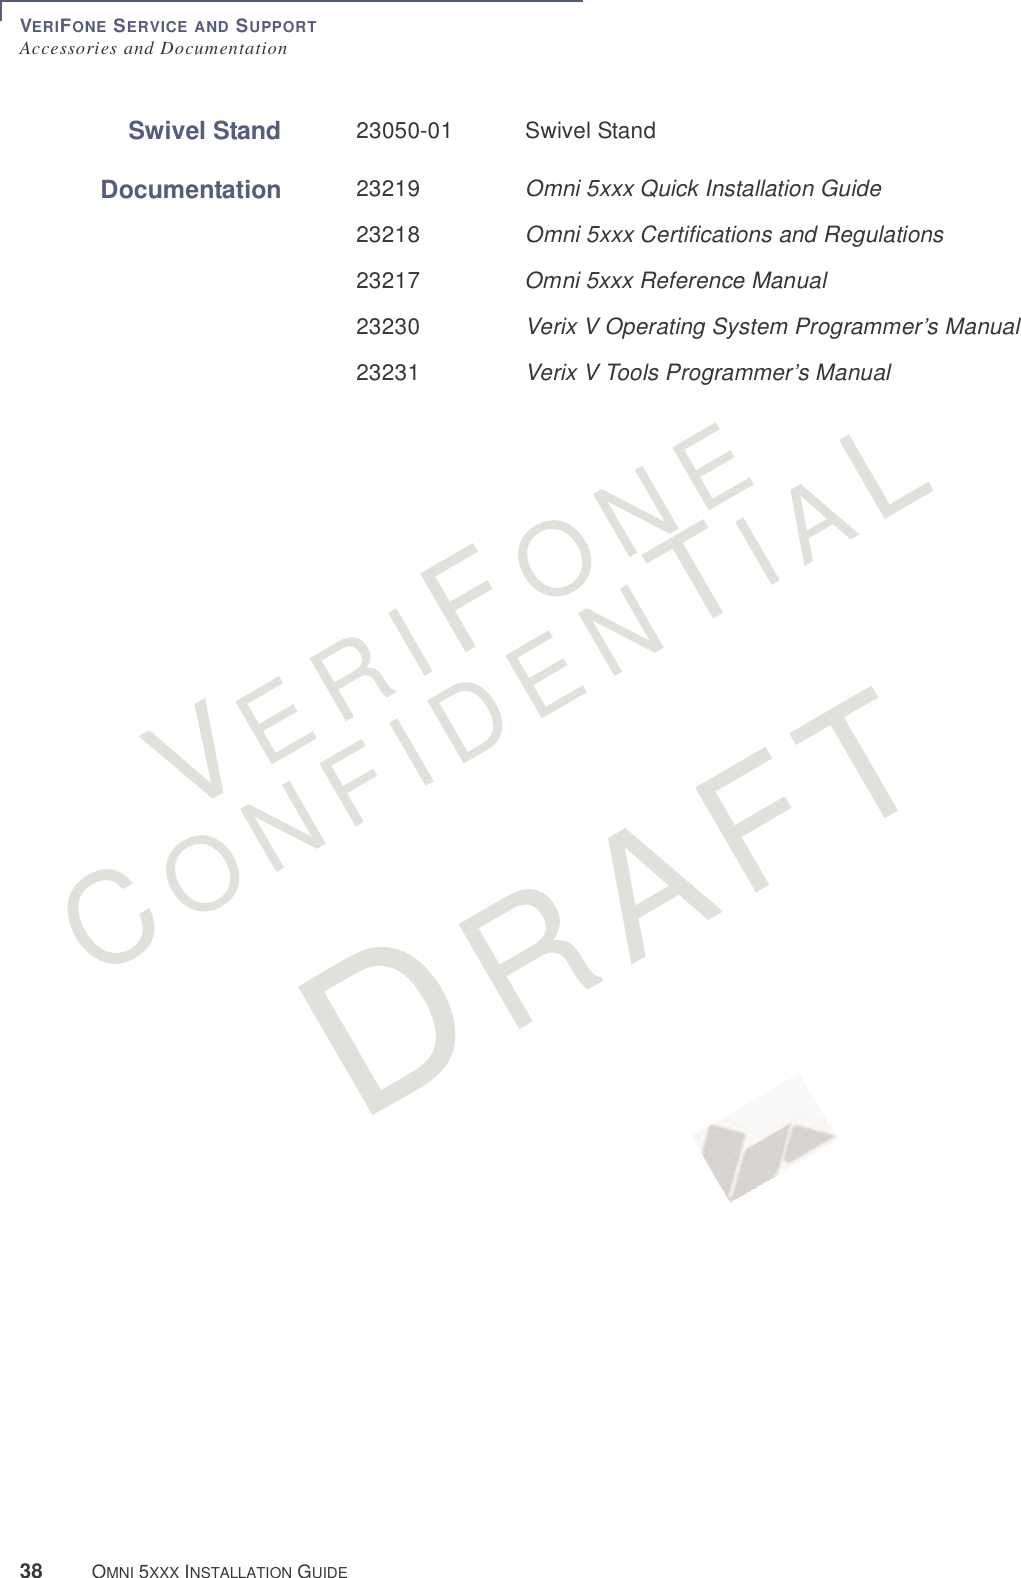 VERIFONE SERVICE AND SUPPORTAccessories and Documentation38 OMNI 5XXX INSTALLATION GUIDEVERIFONECONFIDENTIALRAFT Swivel Stand 23050-01 Swivel StandDocumentation 23219 Omni 5xxx Quick Installation Guide23218 Omni 5xxx Certifications and Regulations23217 Omni 5xxx Reference Manual23230 Verix V Operating System Programmer’s Manual23231 Verix V Tools Programmer’s Manual